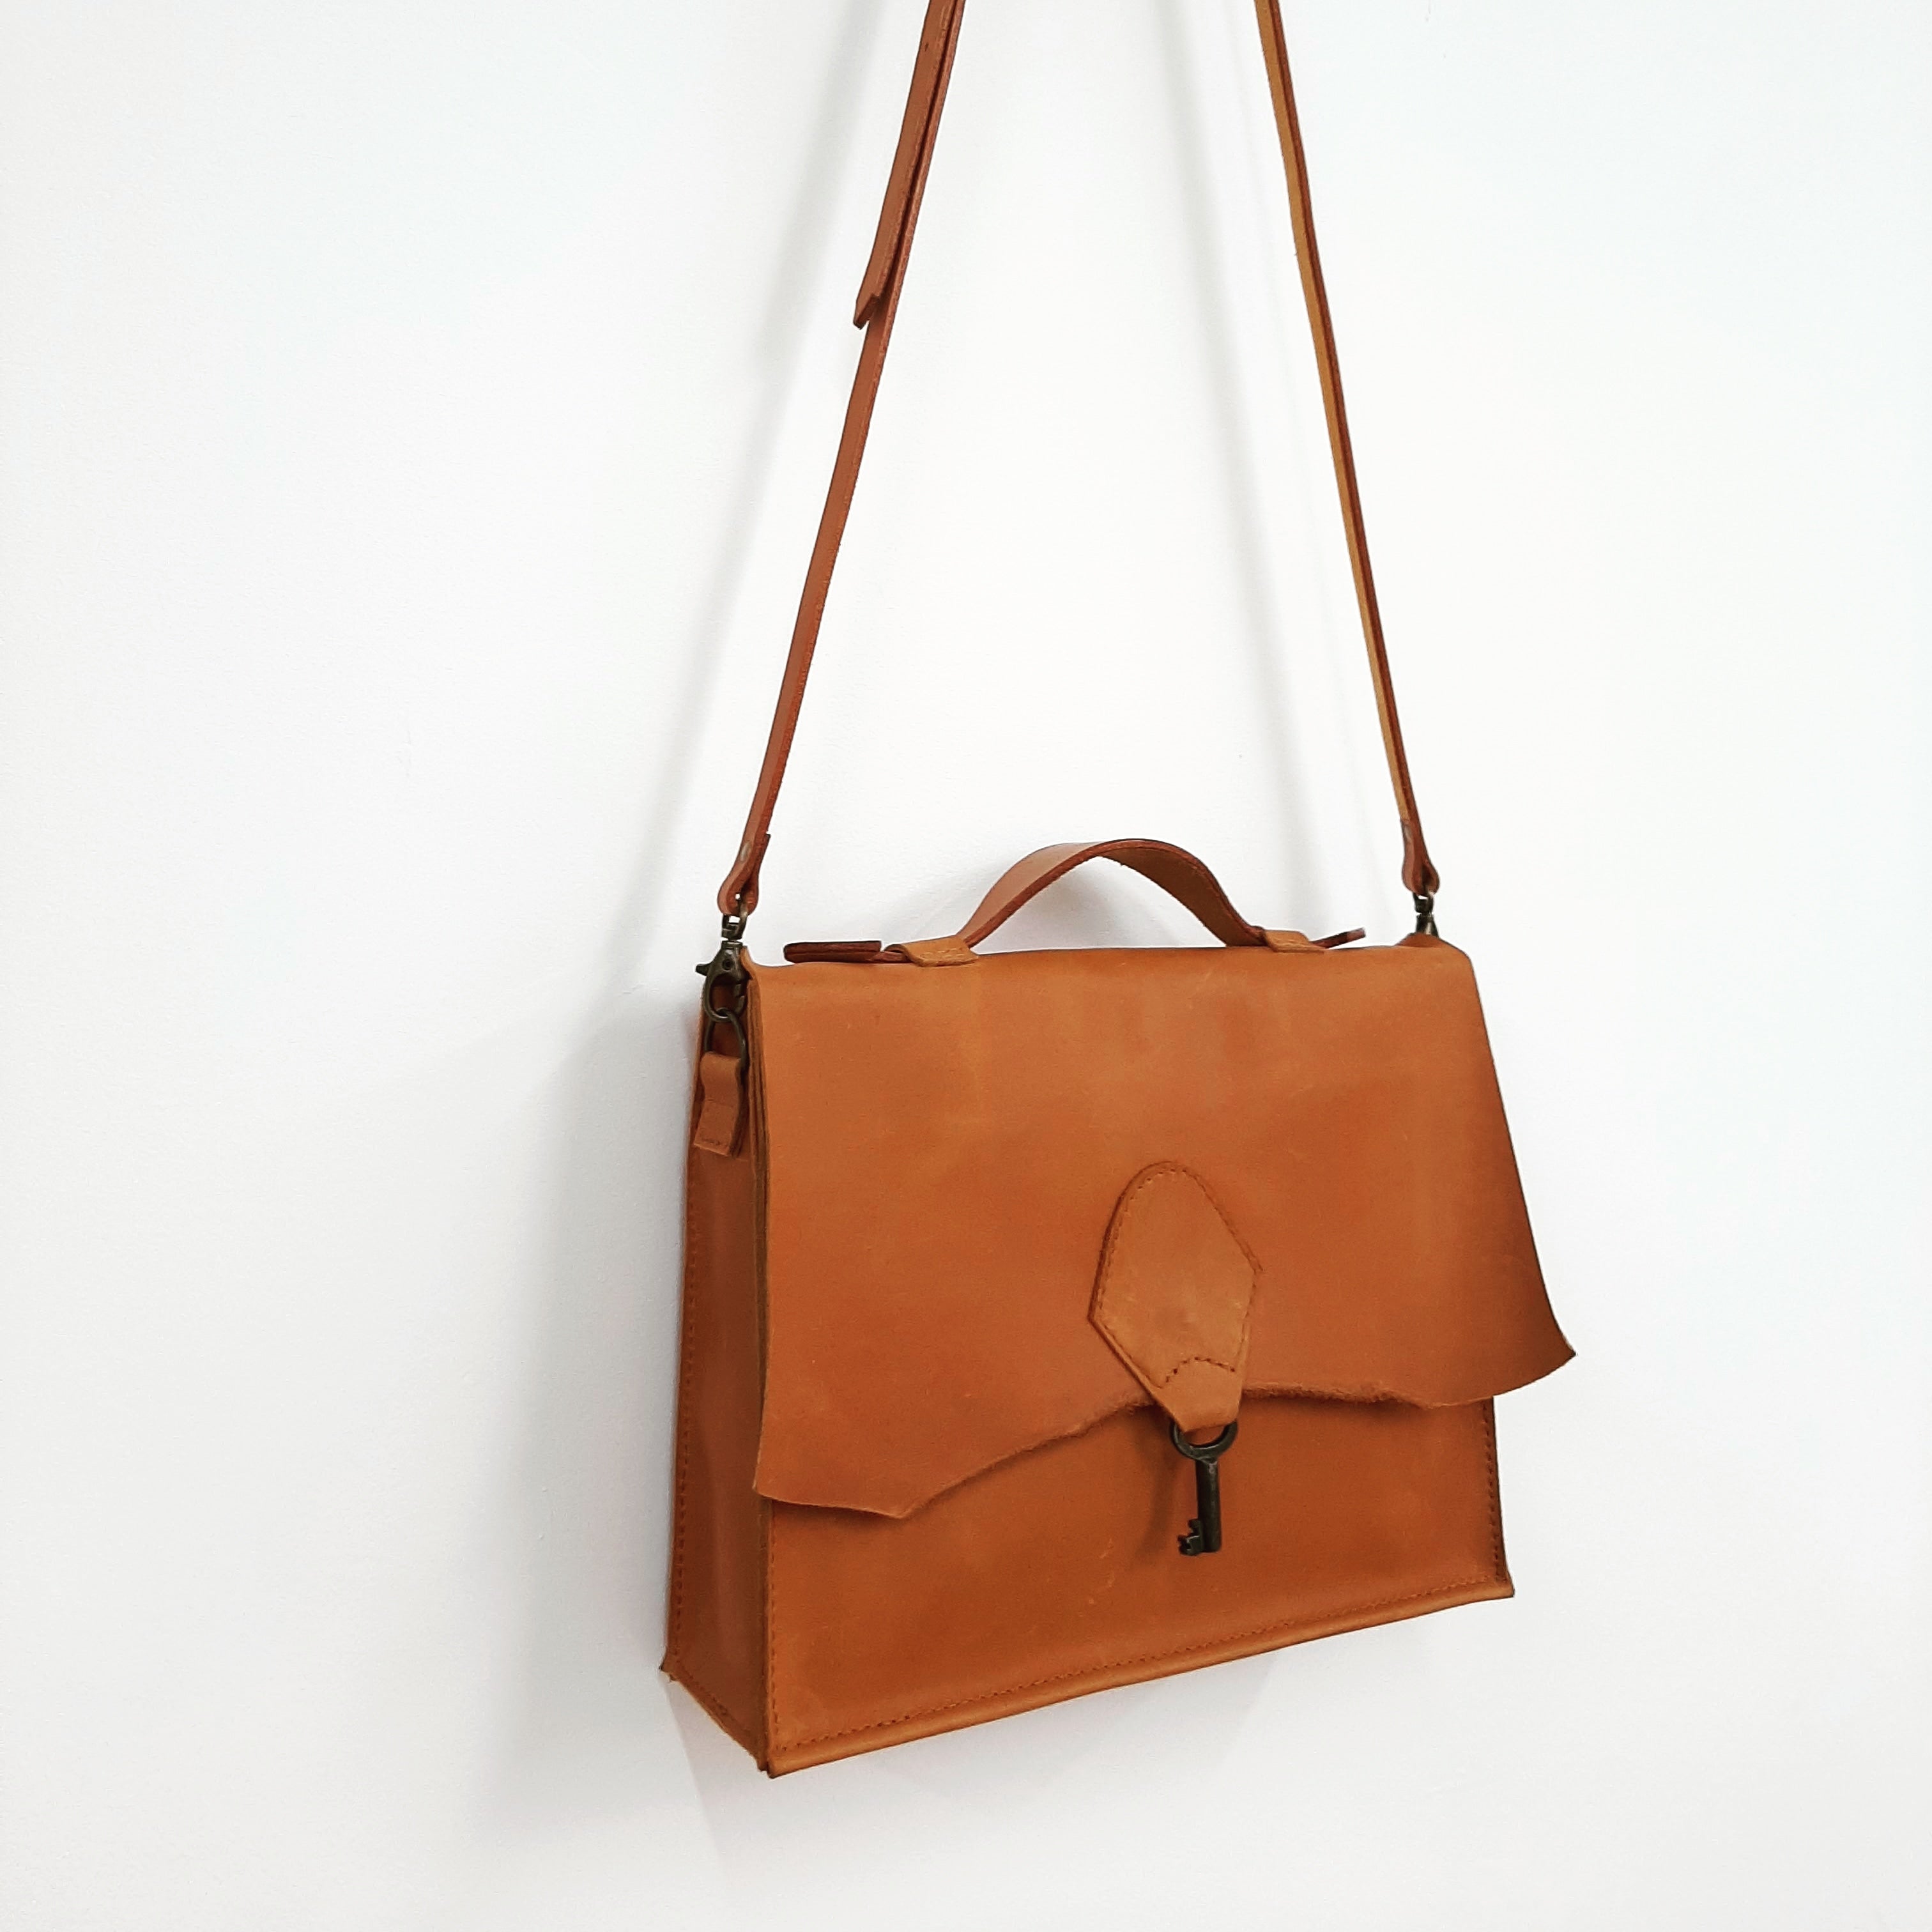 'The Lifestyle' with vintage key - Tan - Coterie Leather Bags